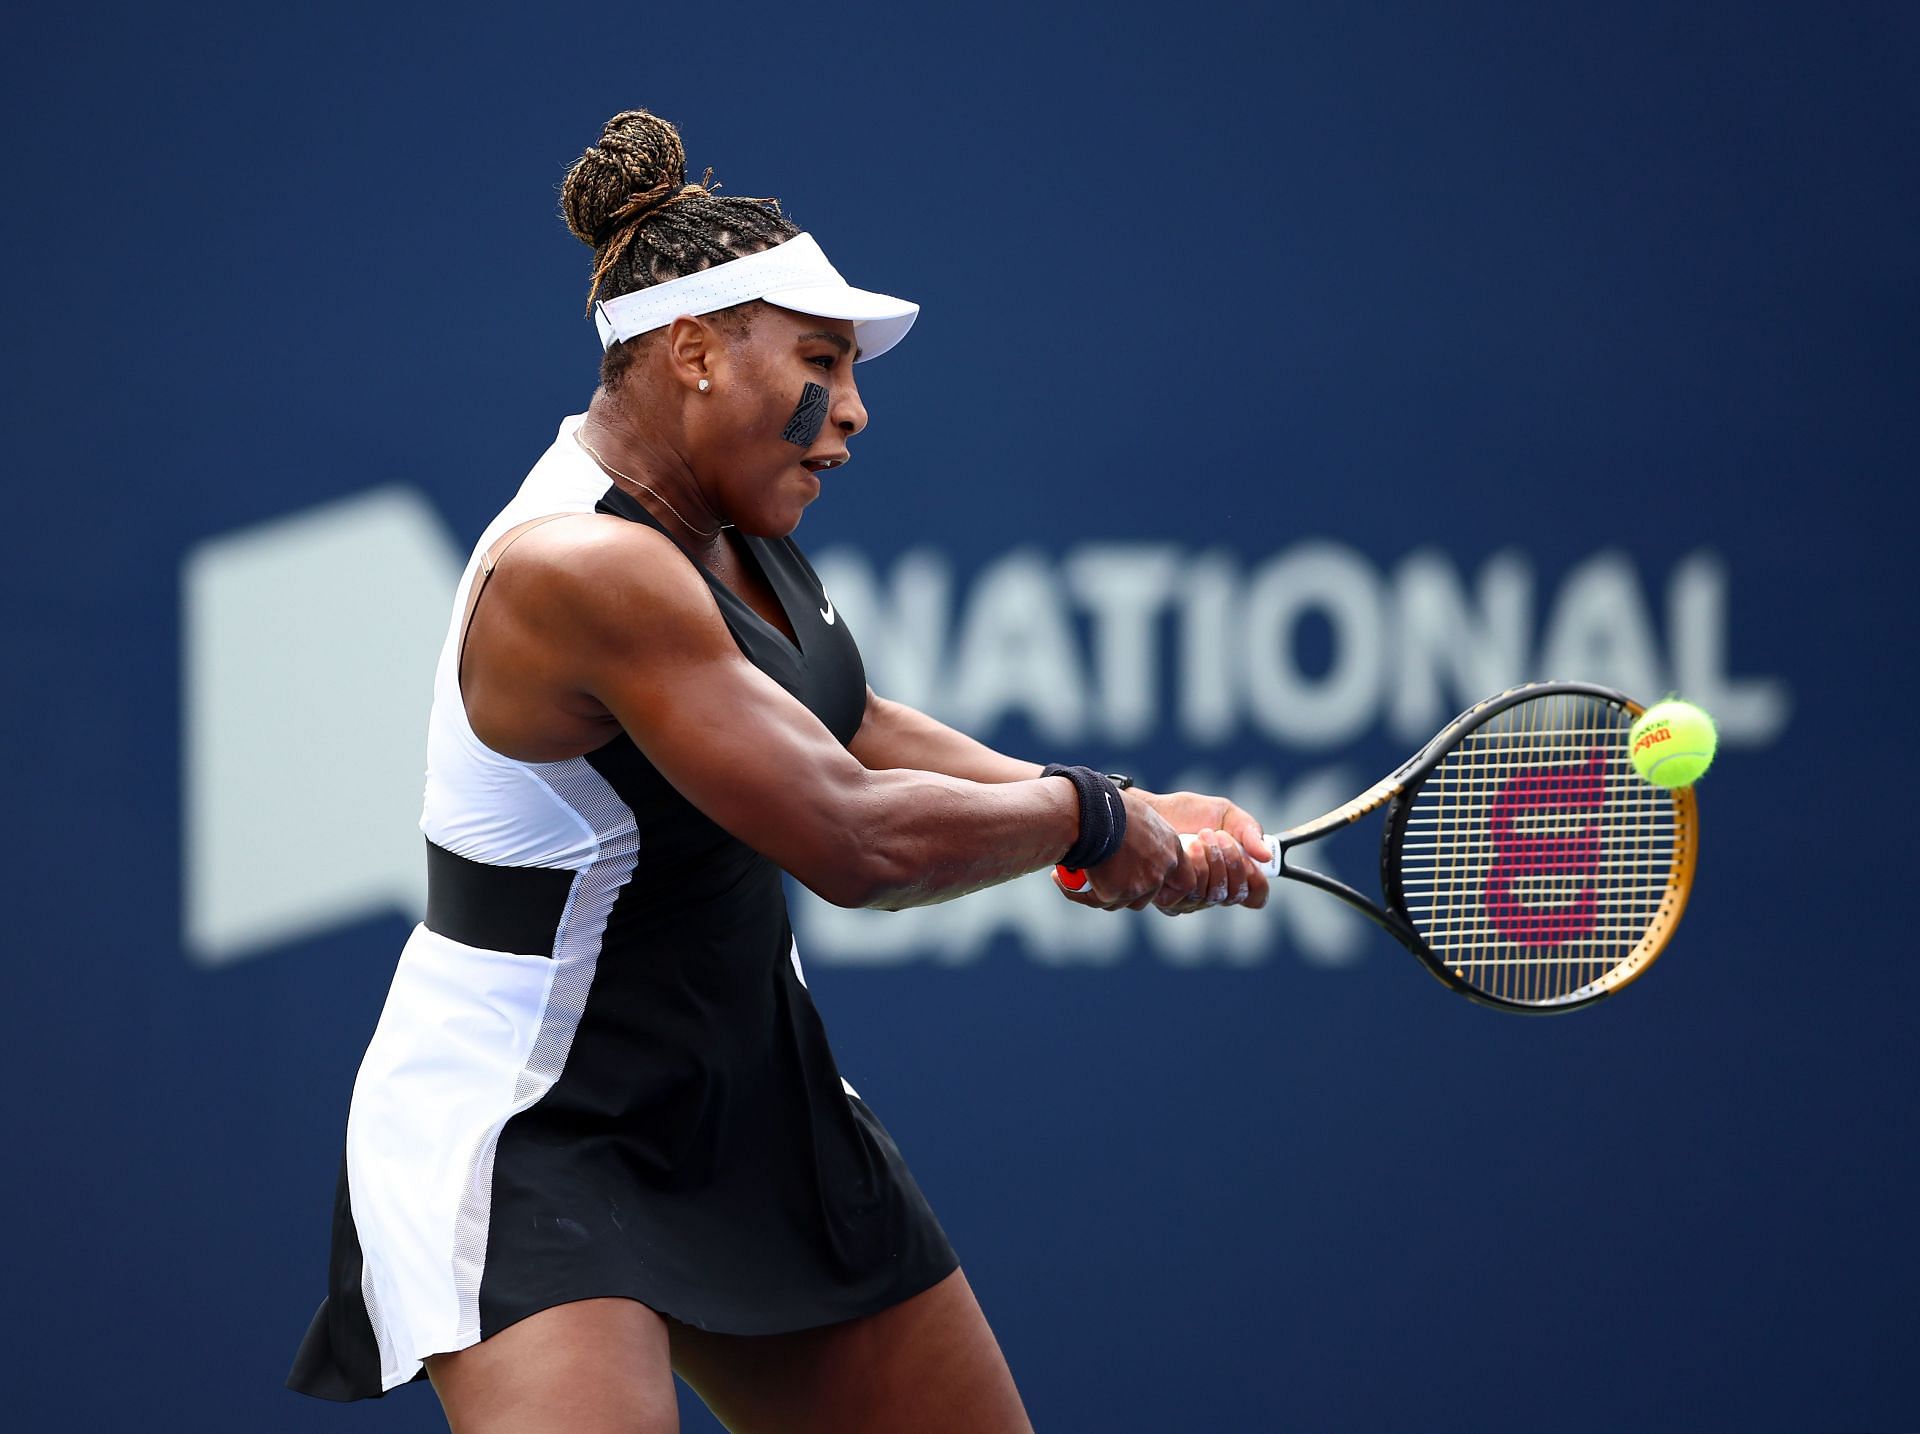 Canadian Open Results Today Winners, Scores and Recap as Serena Williams wins first singles match in 14 months, Venus Williams eliminated August 8